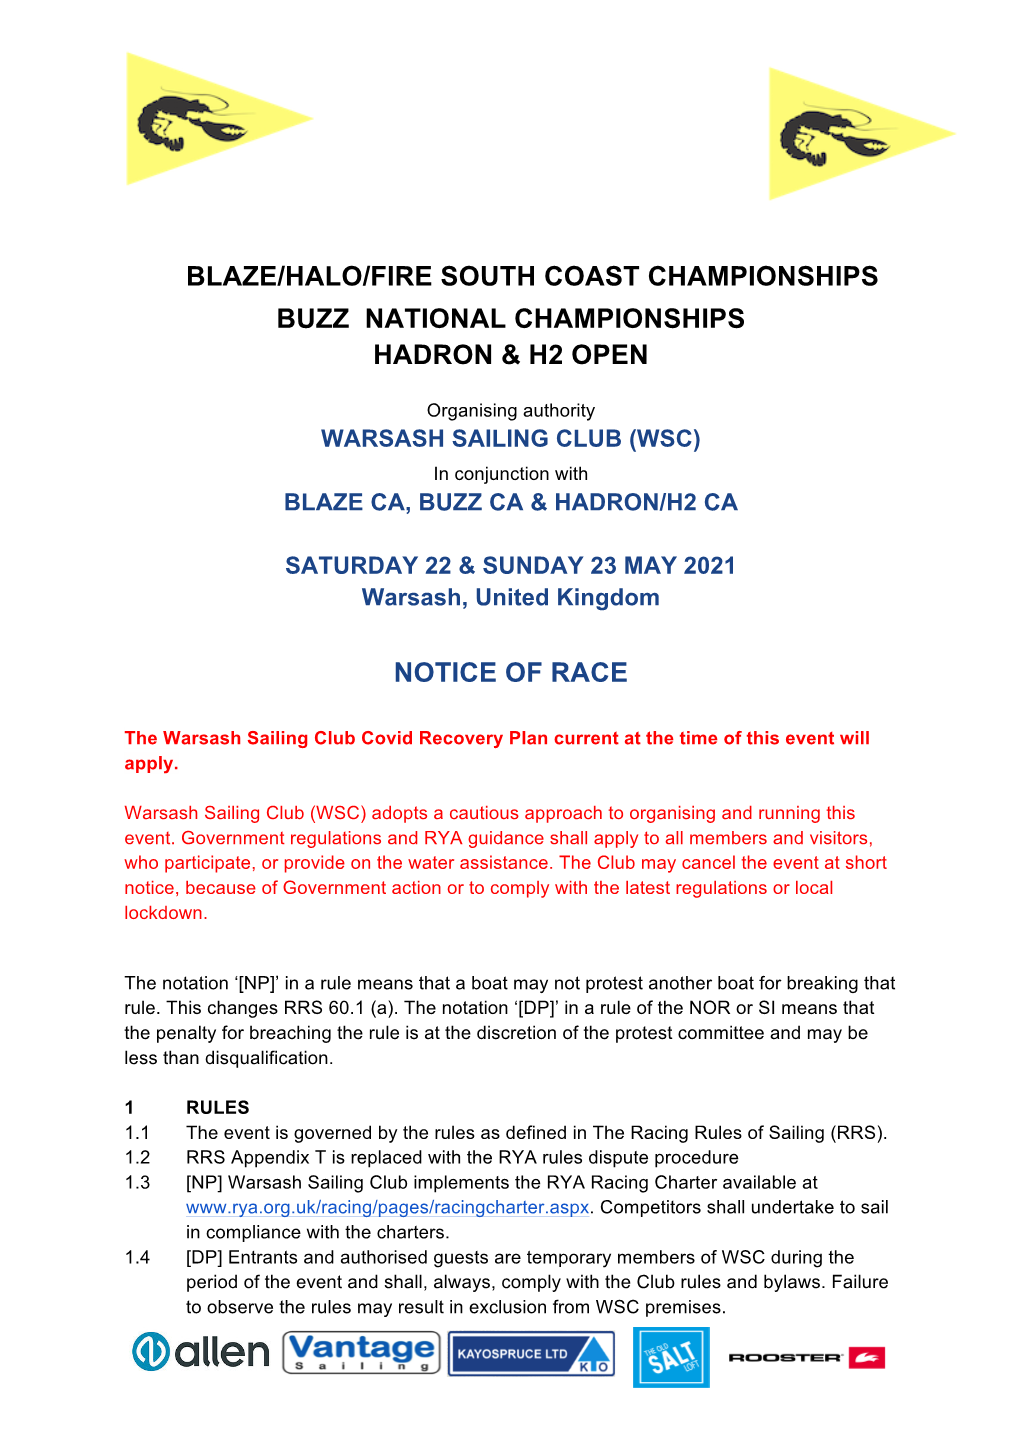 Blaze/Halo/Fire South Coast Championships Buzz National Championships Hadron & H2 Open Notice of Race